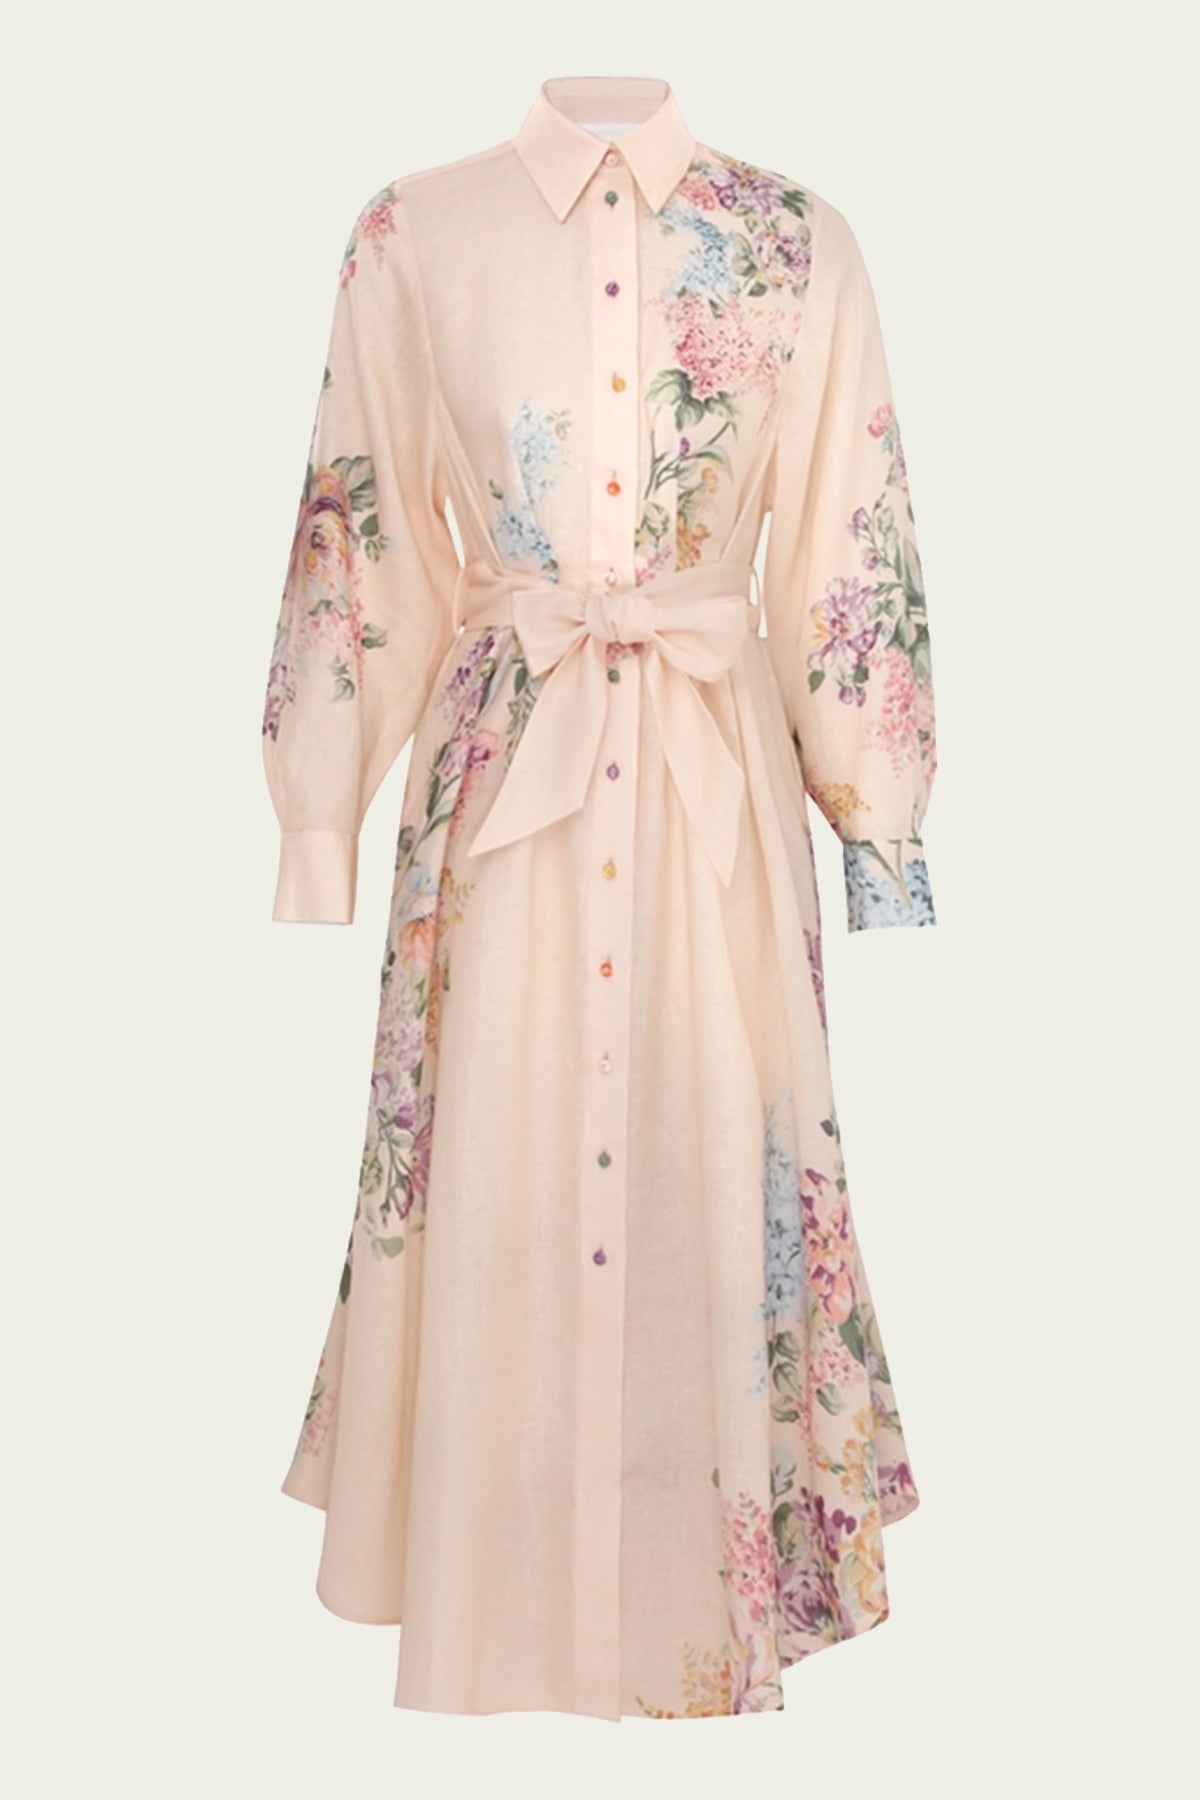 Halliday Tucked Shirt Dress in Cream Watercolour Floral - shop - olivia.com